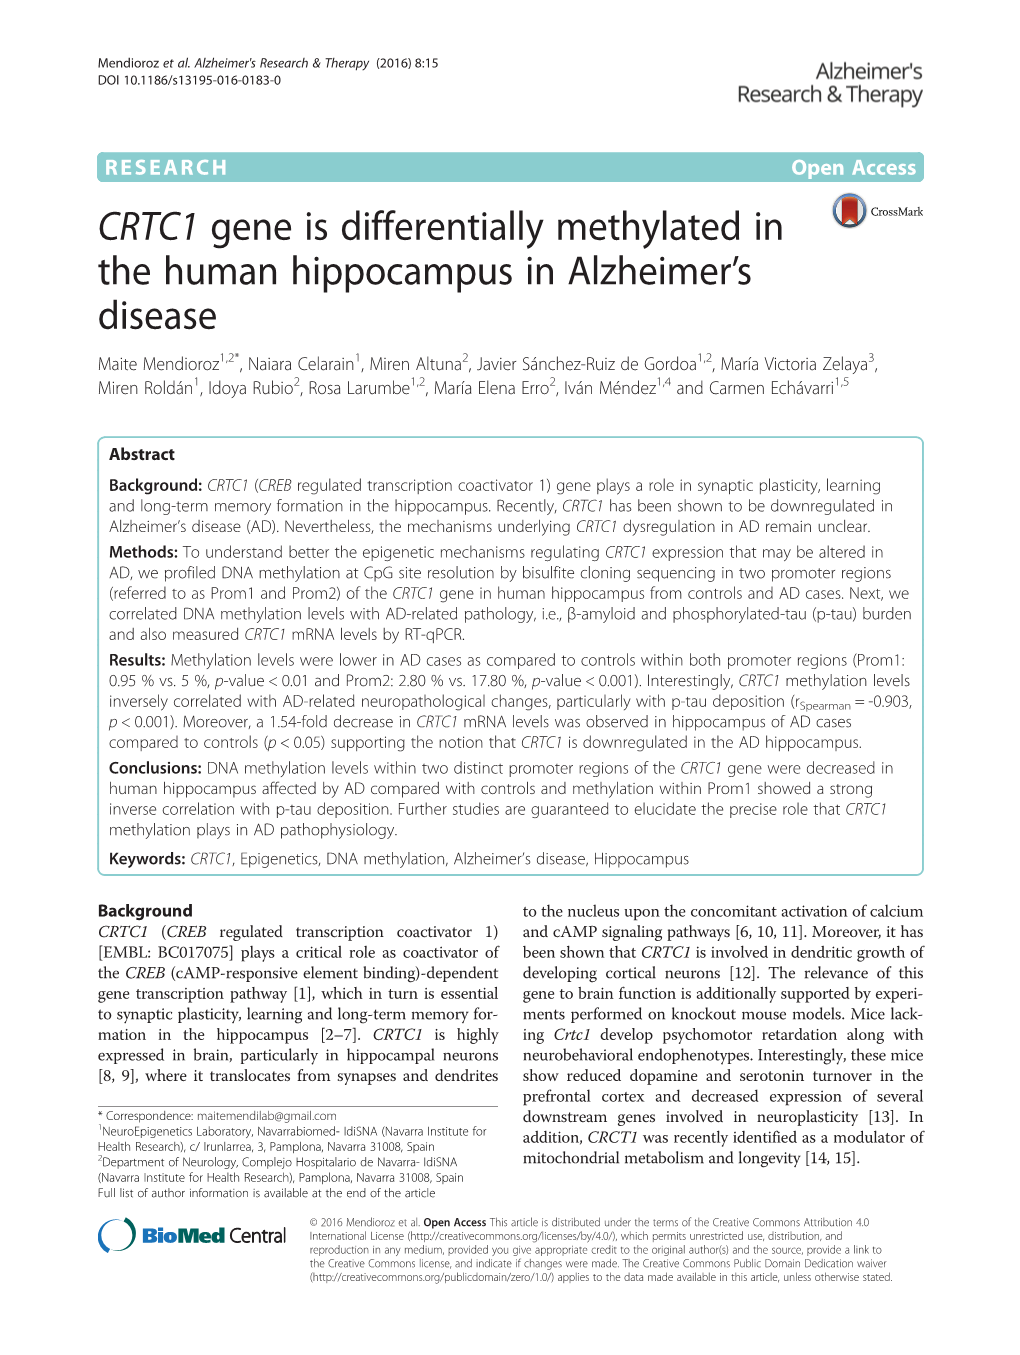 CRTC1 Gene Is Differentially Methylated in the Human